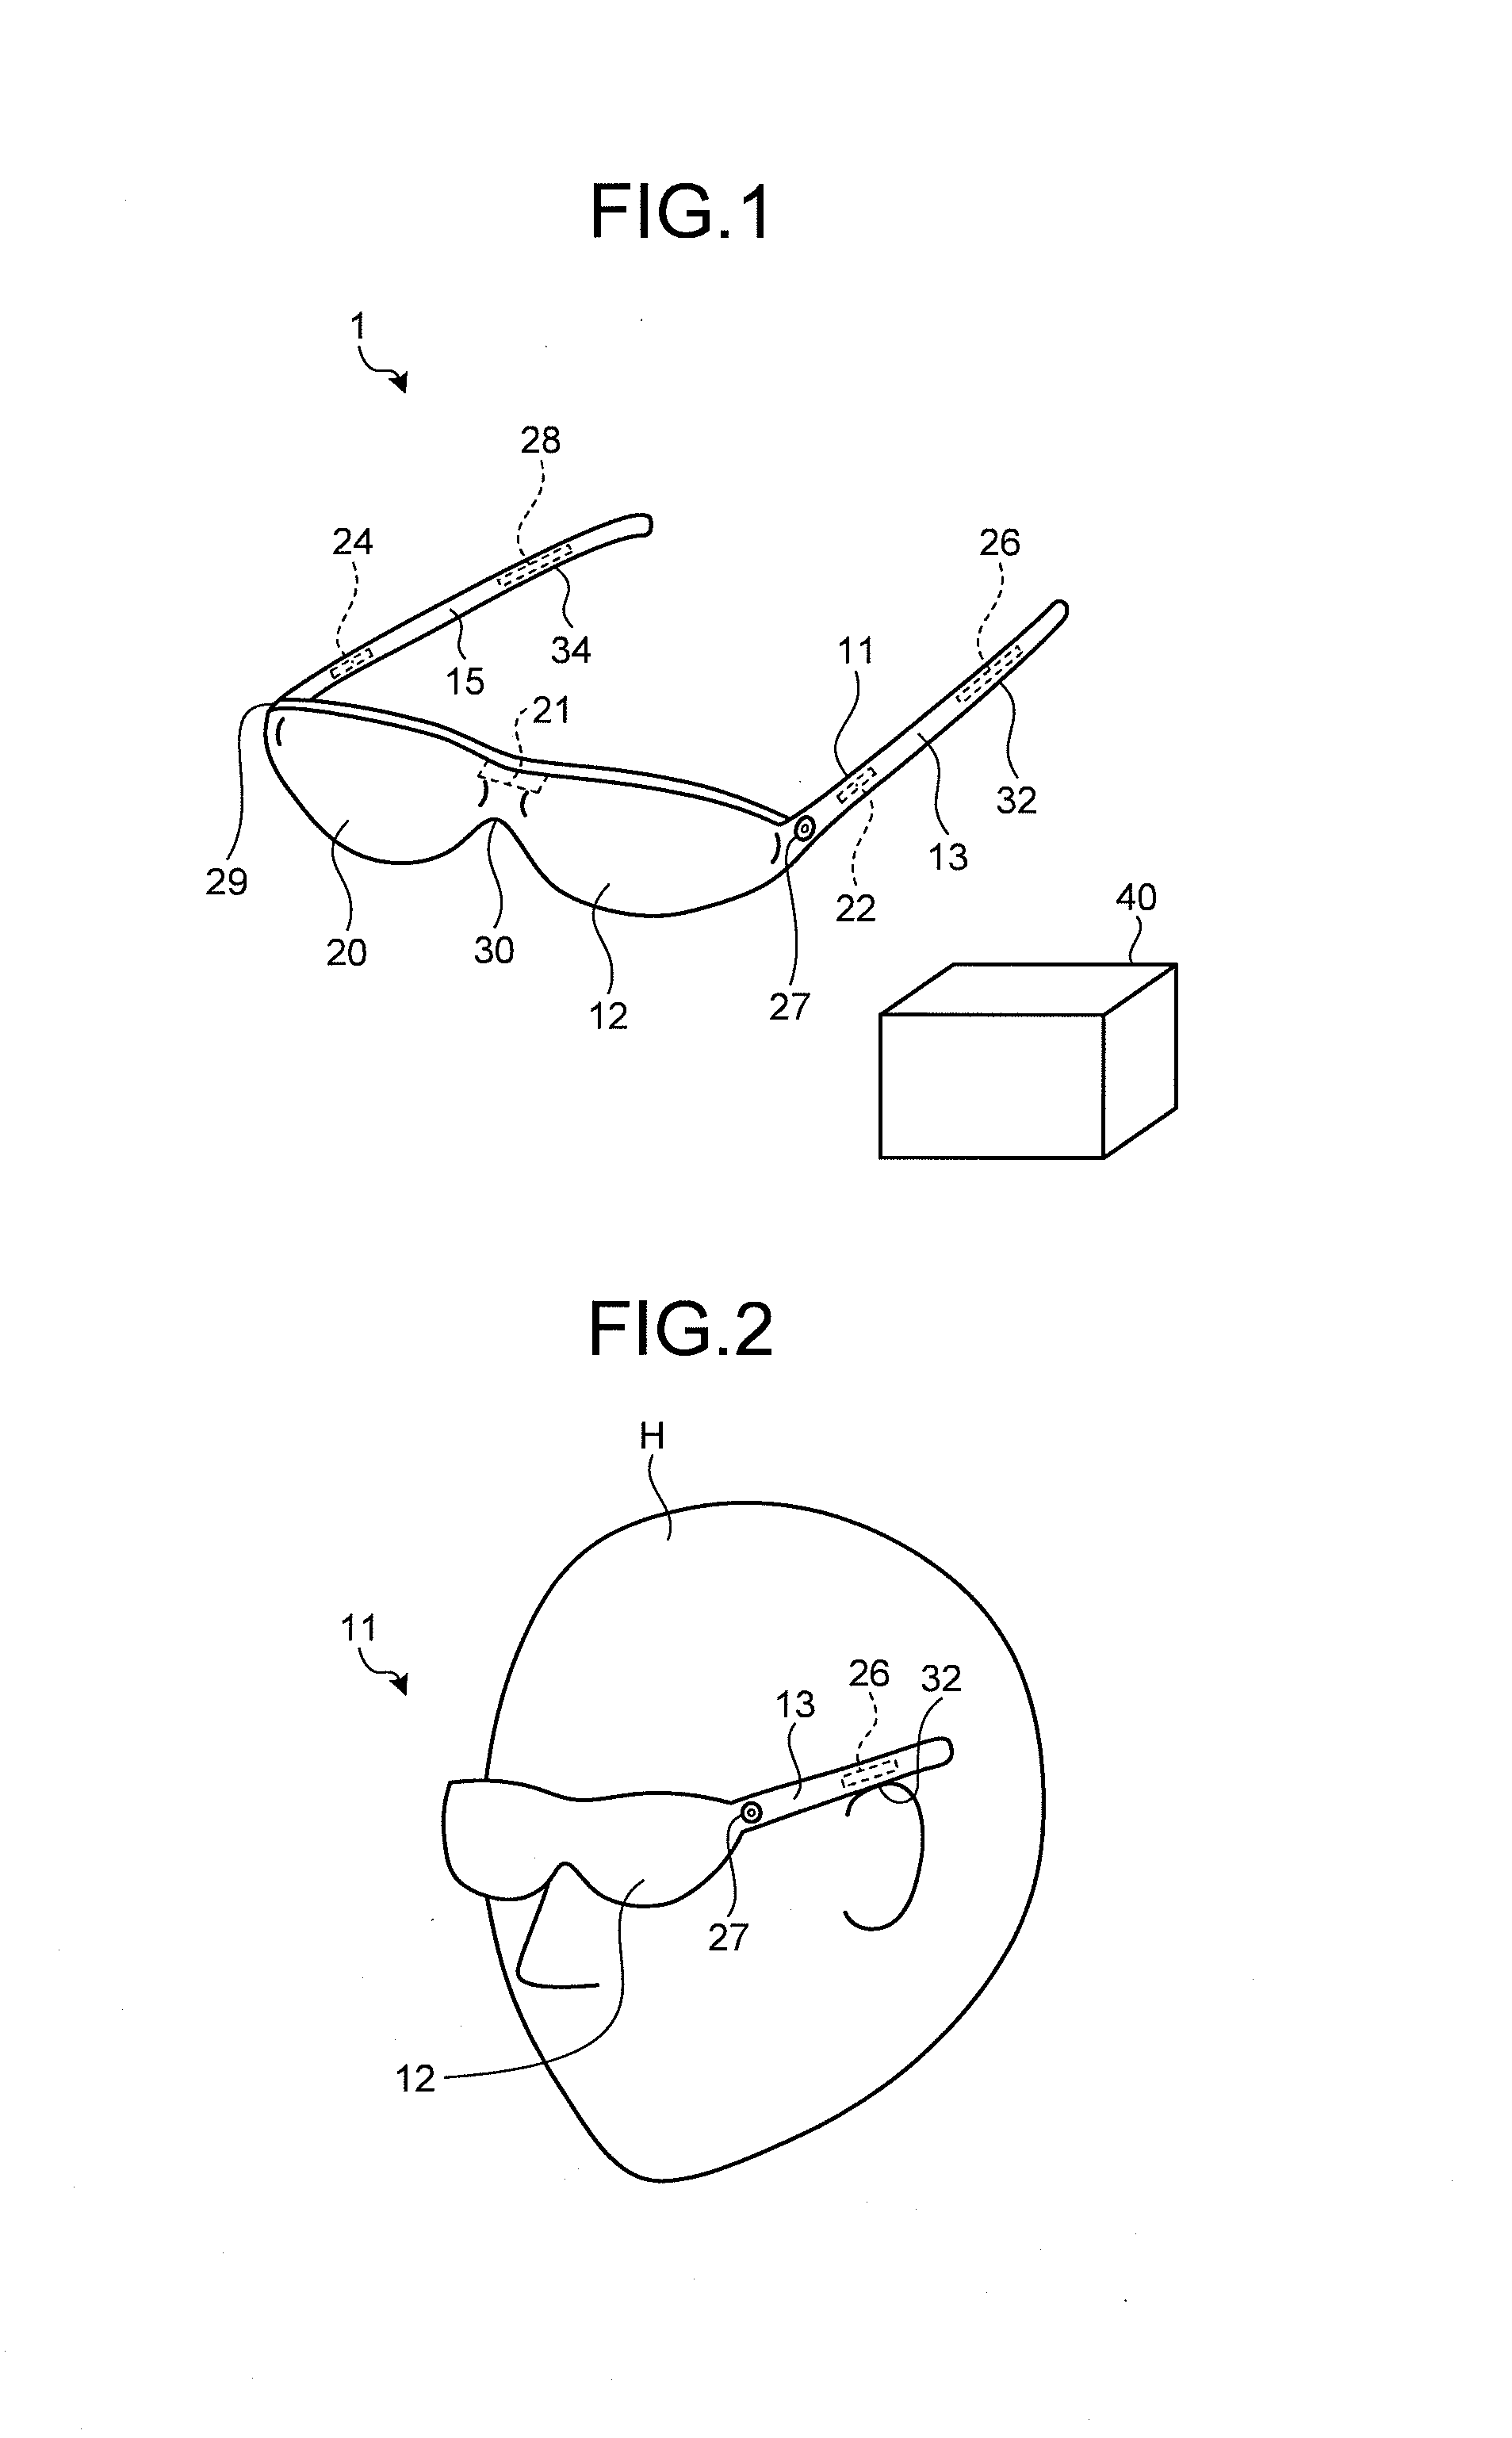 Sound outputting device